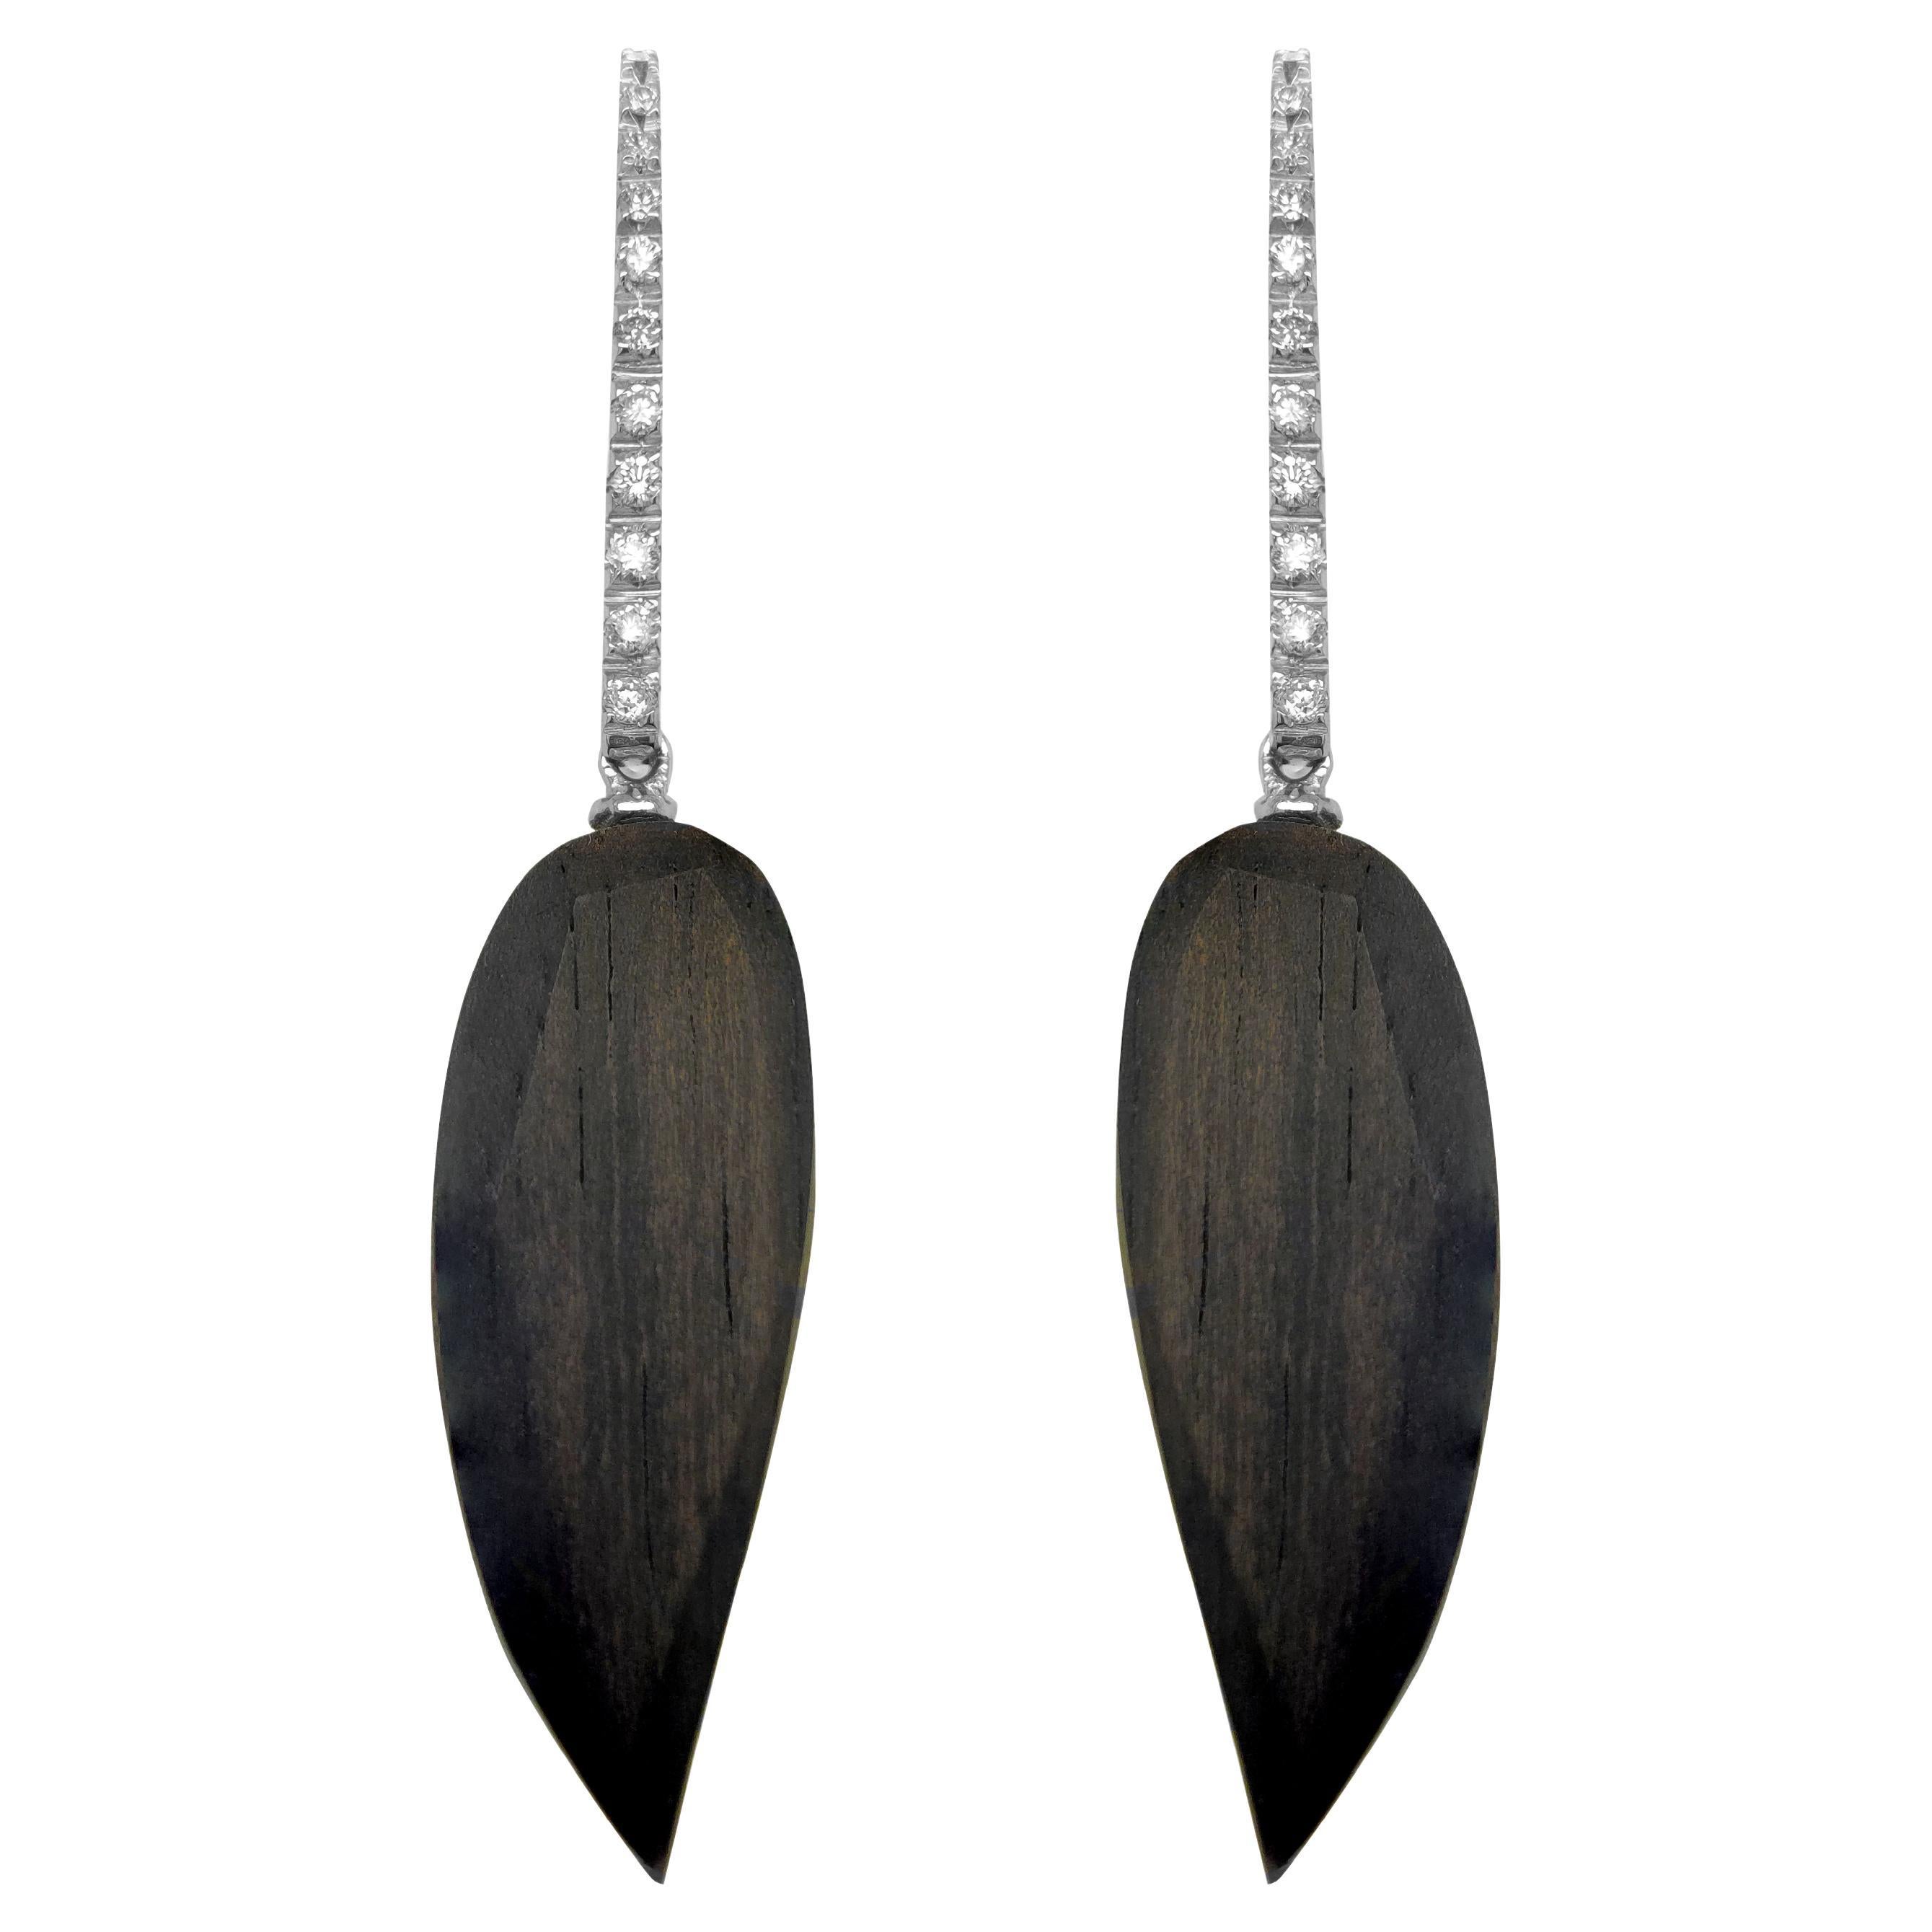 Earring Funny Shape in 18kt white gold, diamonds and faceted ebony drop shape